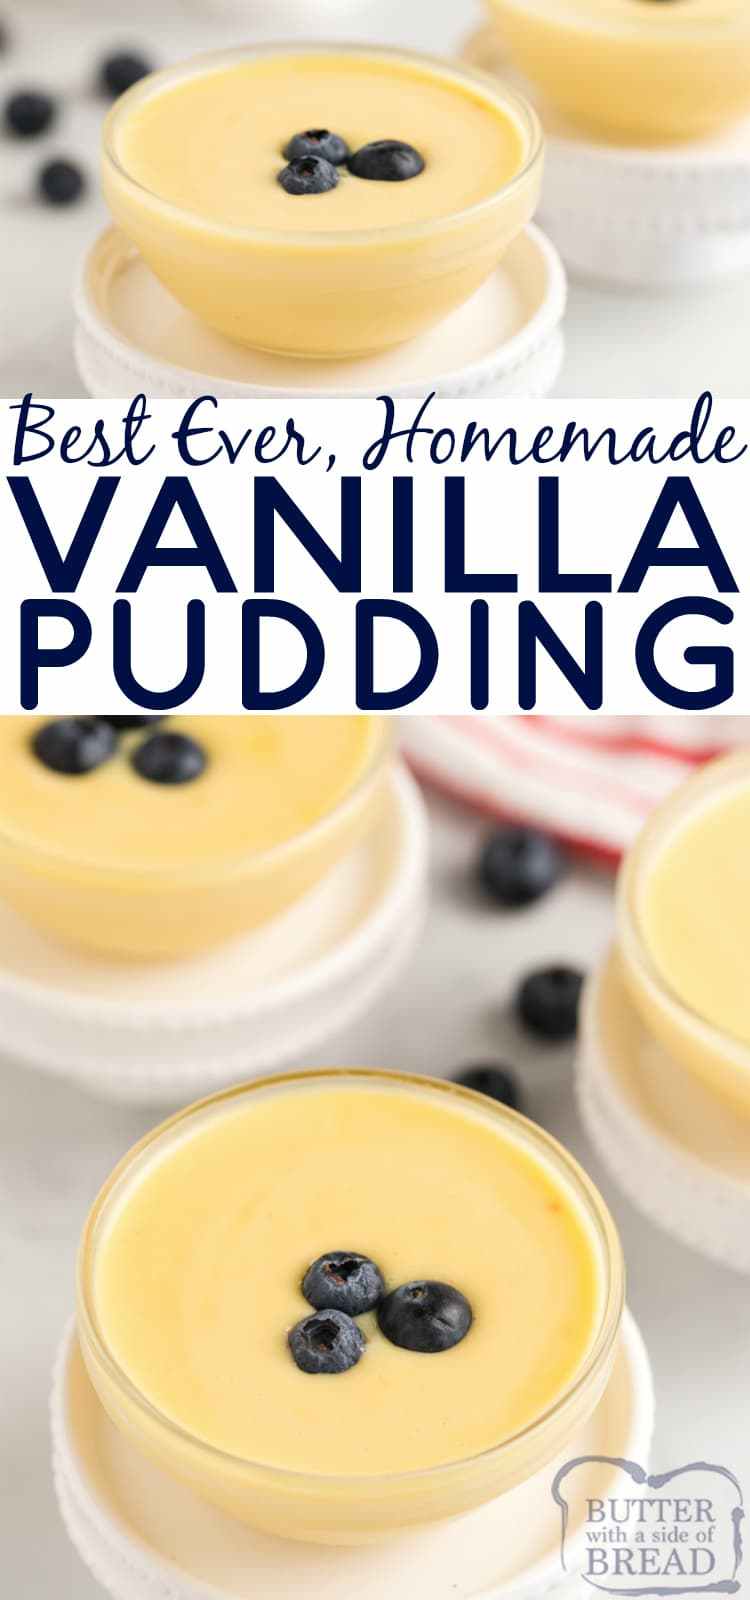 Homemade Vanilla Pudding recipe that is easy to make and tastes so much better than the kind from a box! Just a few simple ingredients in this easy vanilla pudding recipe. 